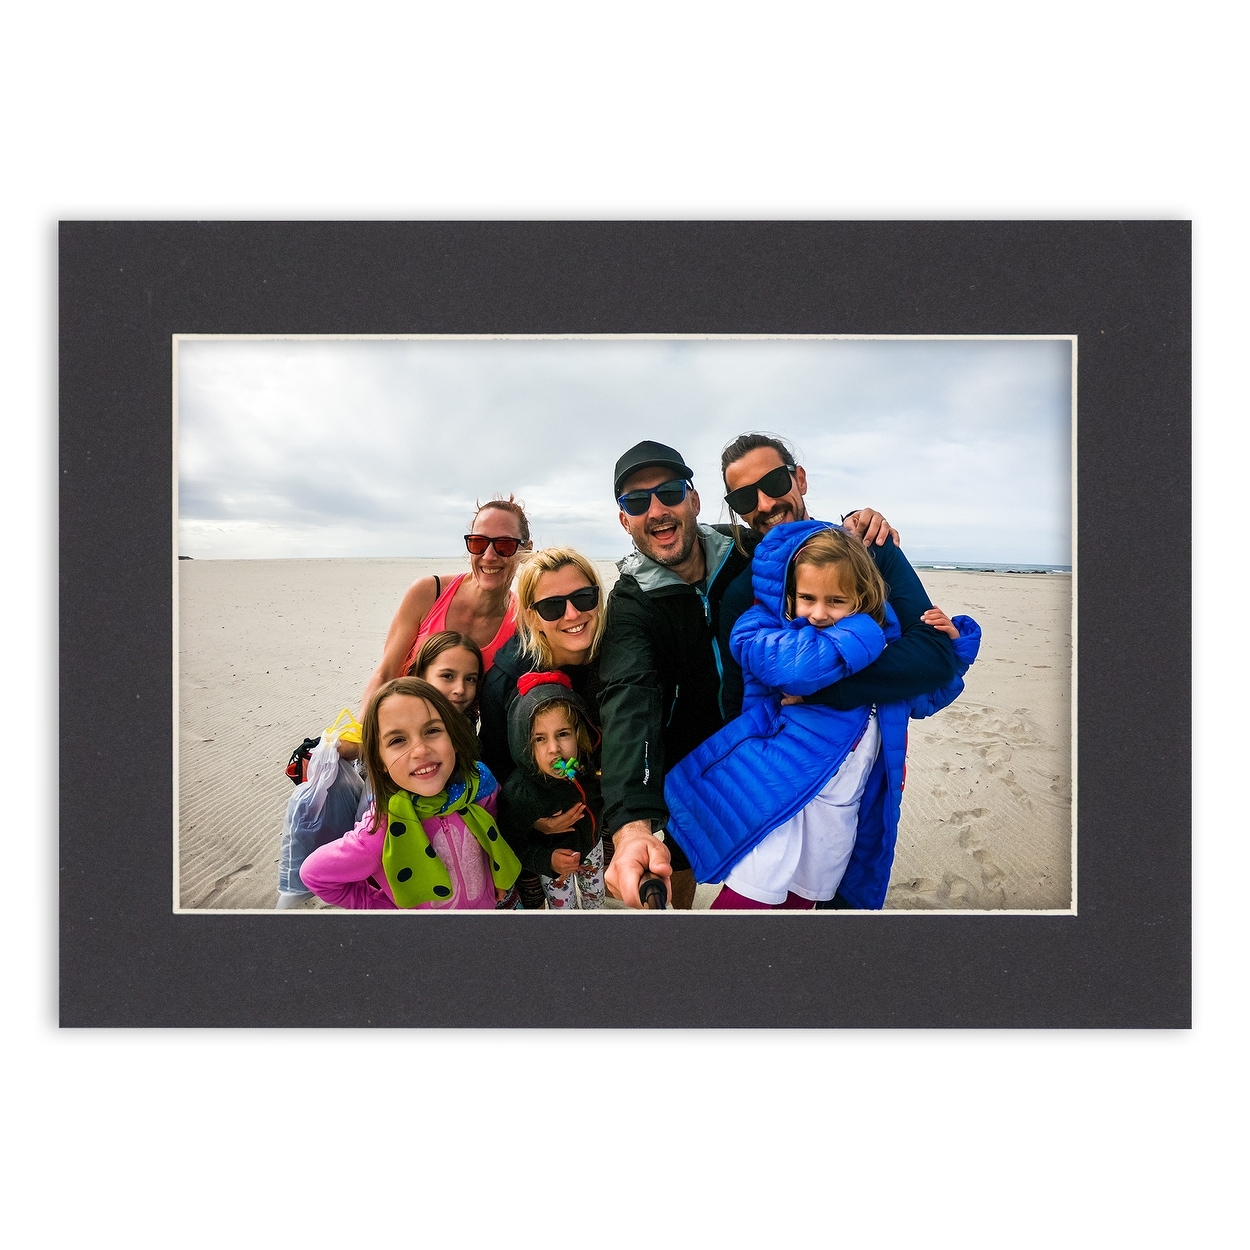 16x20 Mat for 20x24 Frame - Precut Mat Board Acid-Free Black 16x20 Photo Matte Made to Fit A 20x24 Picture Frame